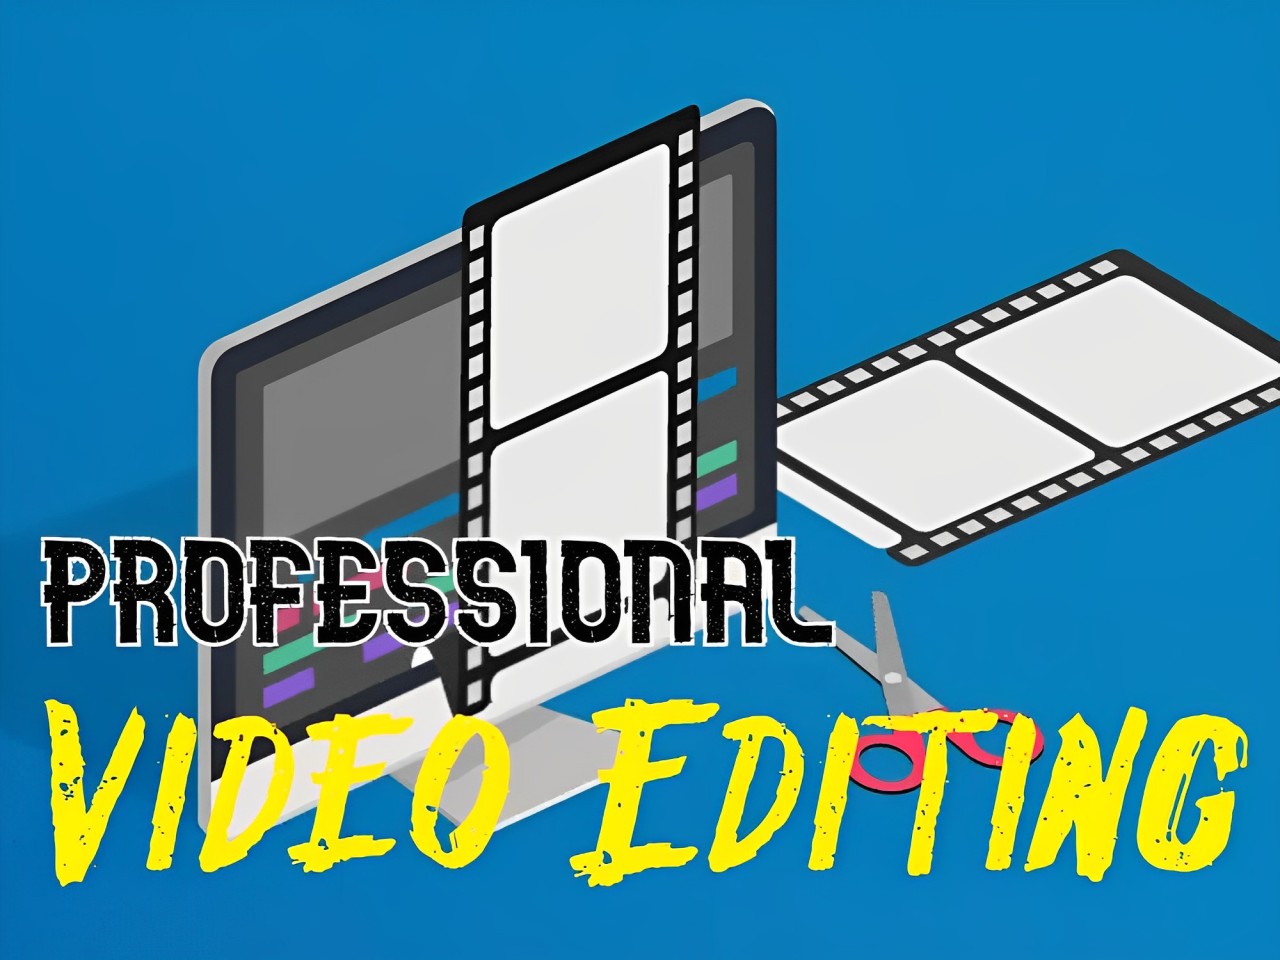 2533I will create commercial promotional explainer video ads for your business